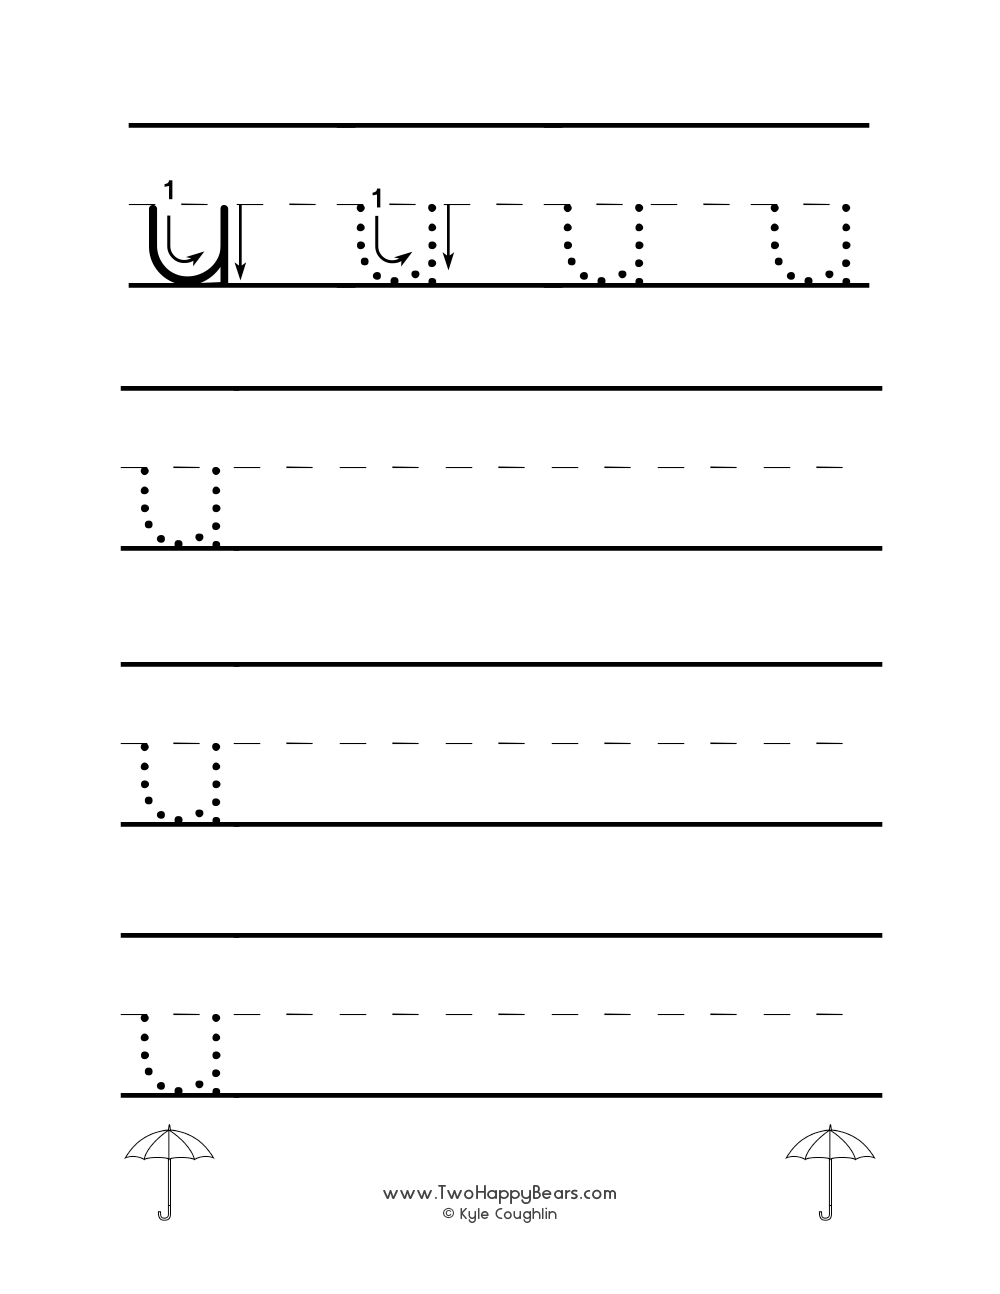 Lowercase letter U worksheet for tracing and drawing